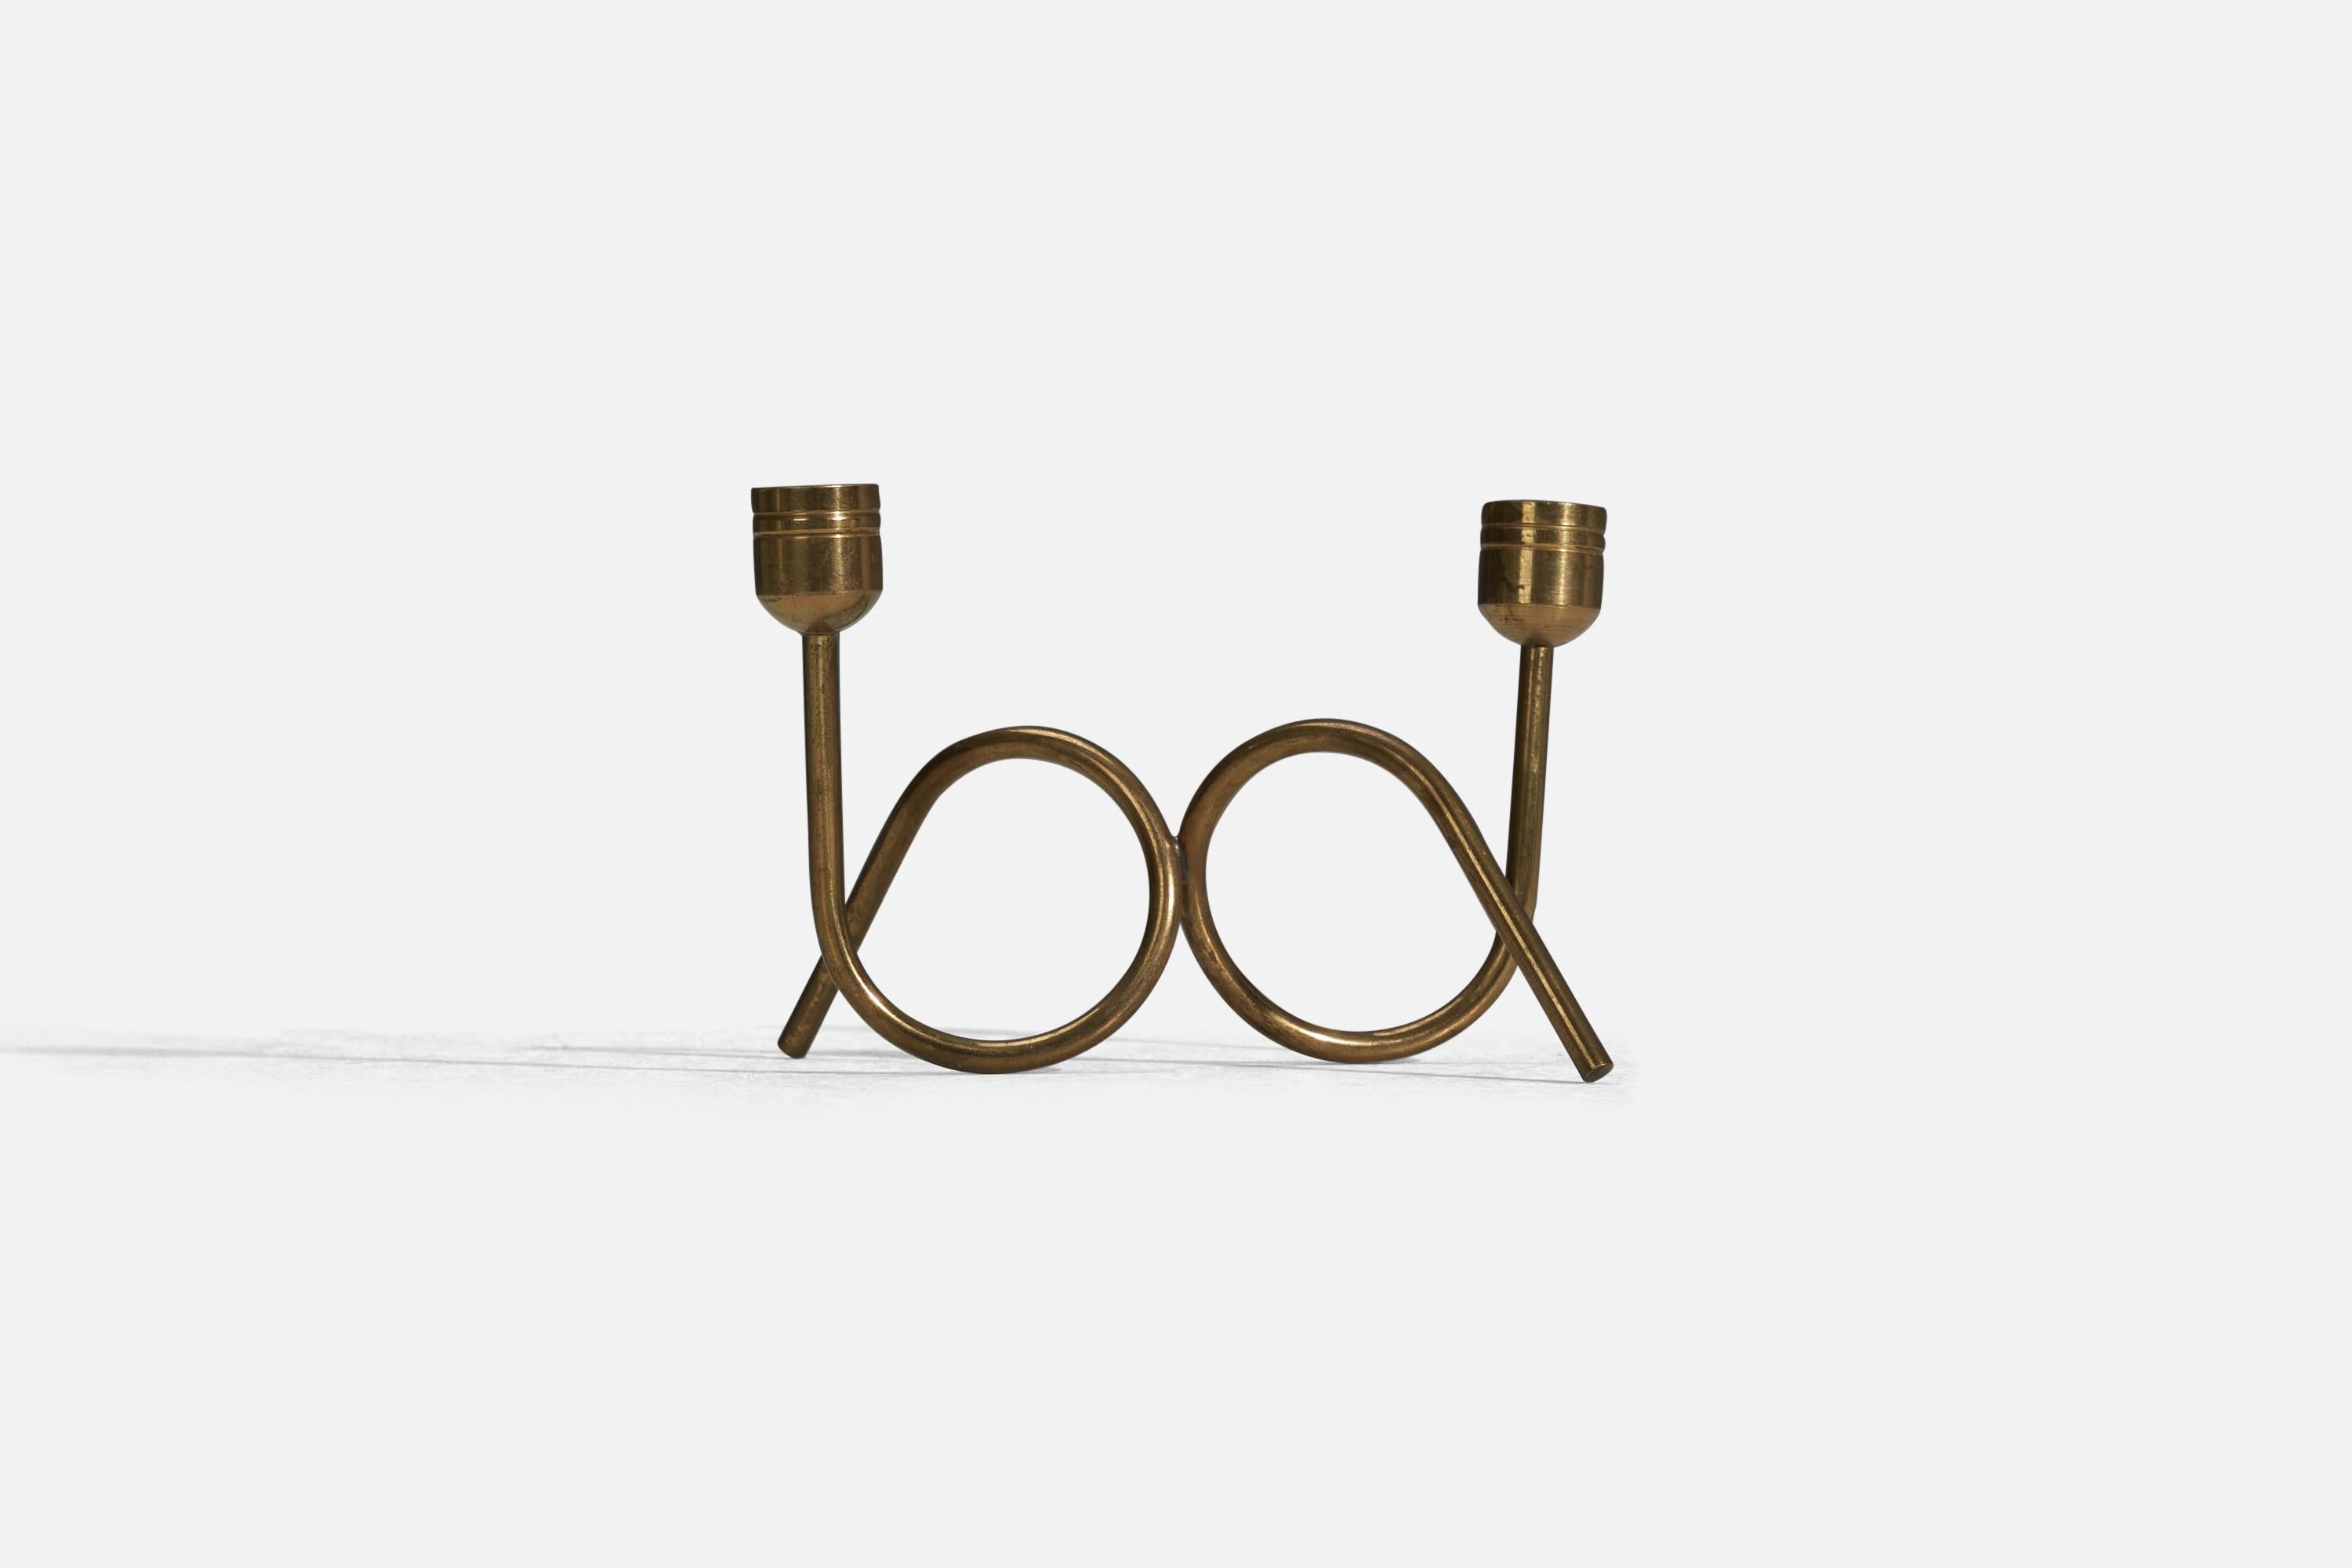 A pair of brass candle holders designed and produced in Denmark, 1940s.